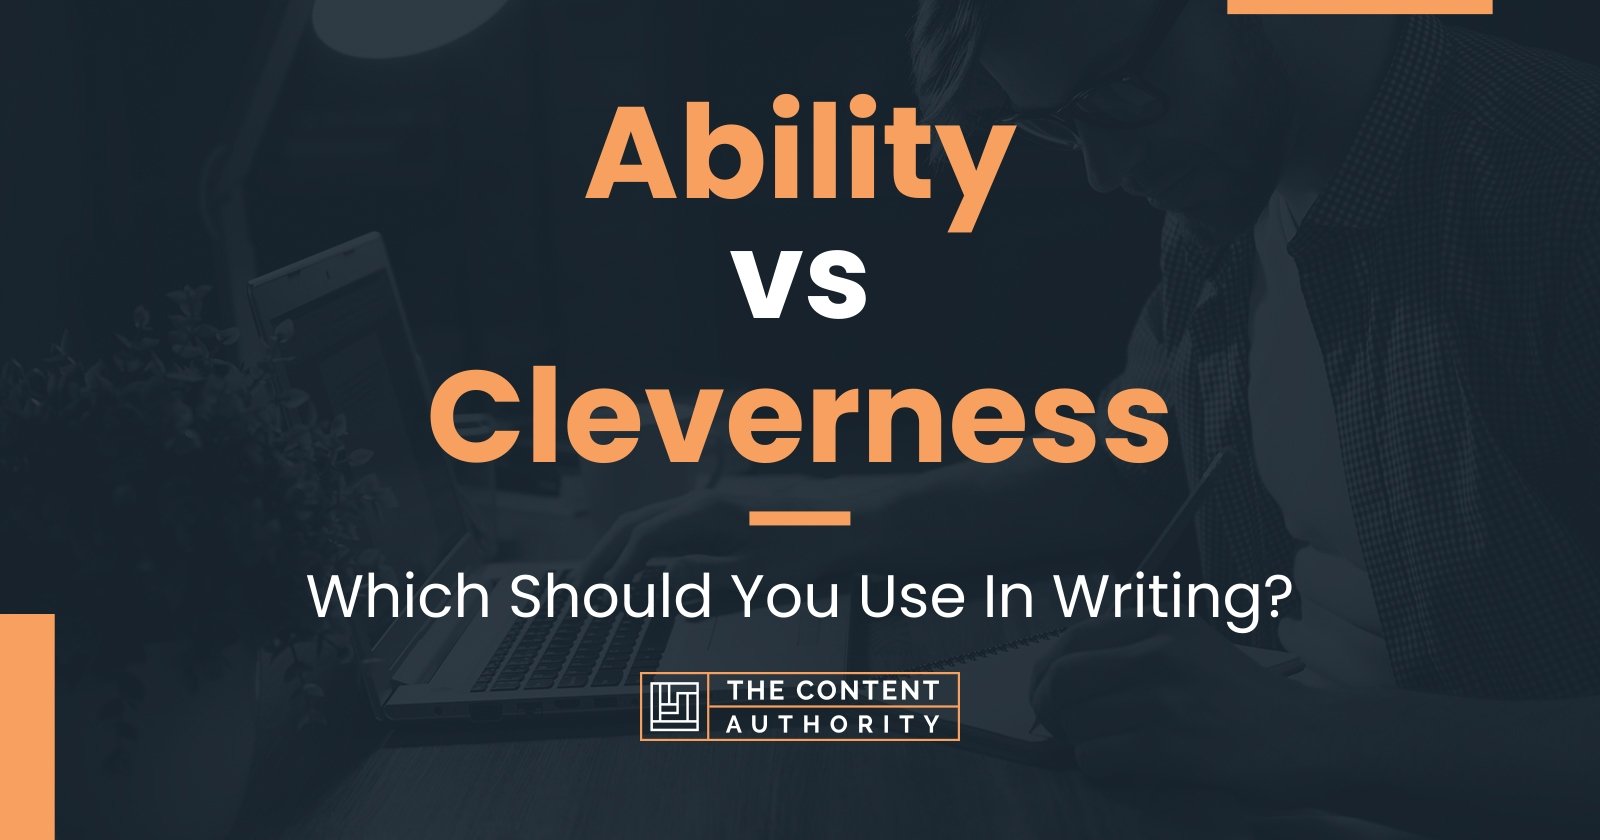 Ability vs Cleverness: Which Should You Use In Writing?